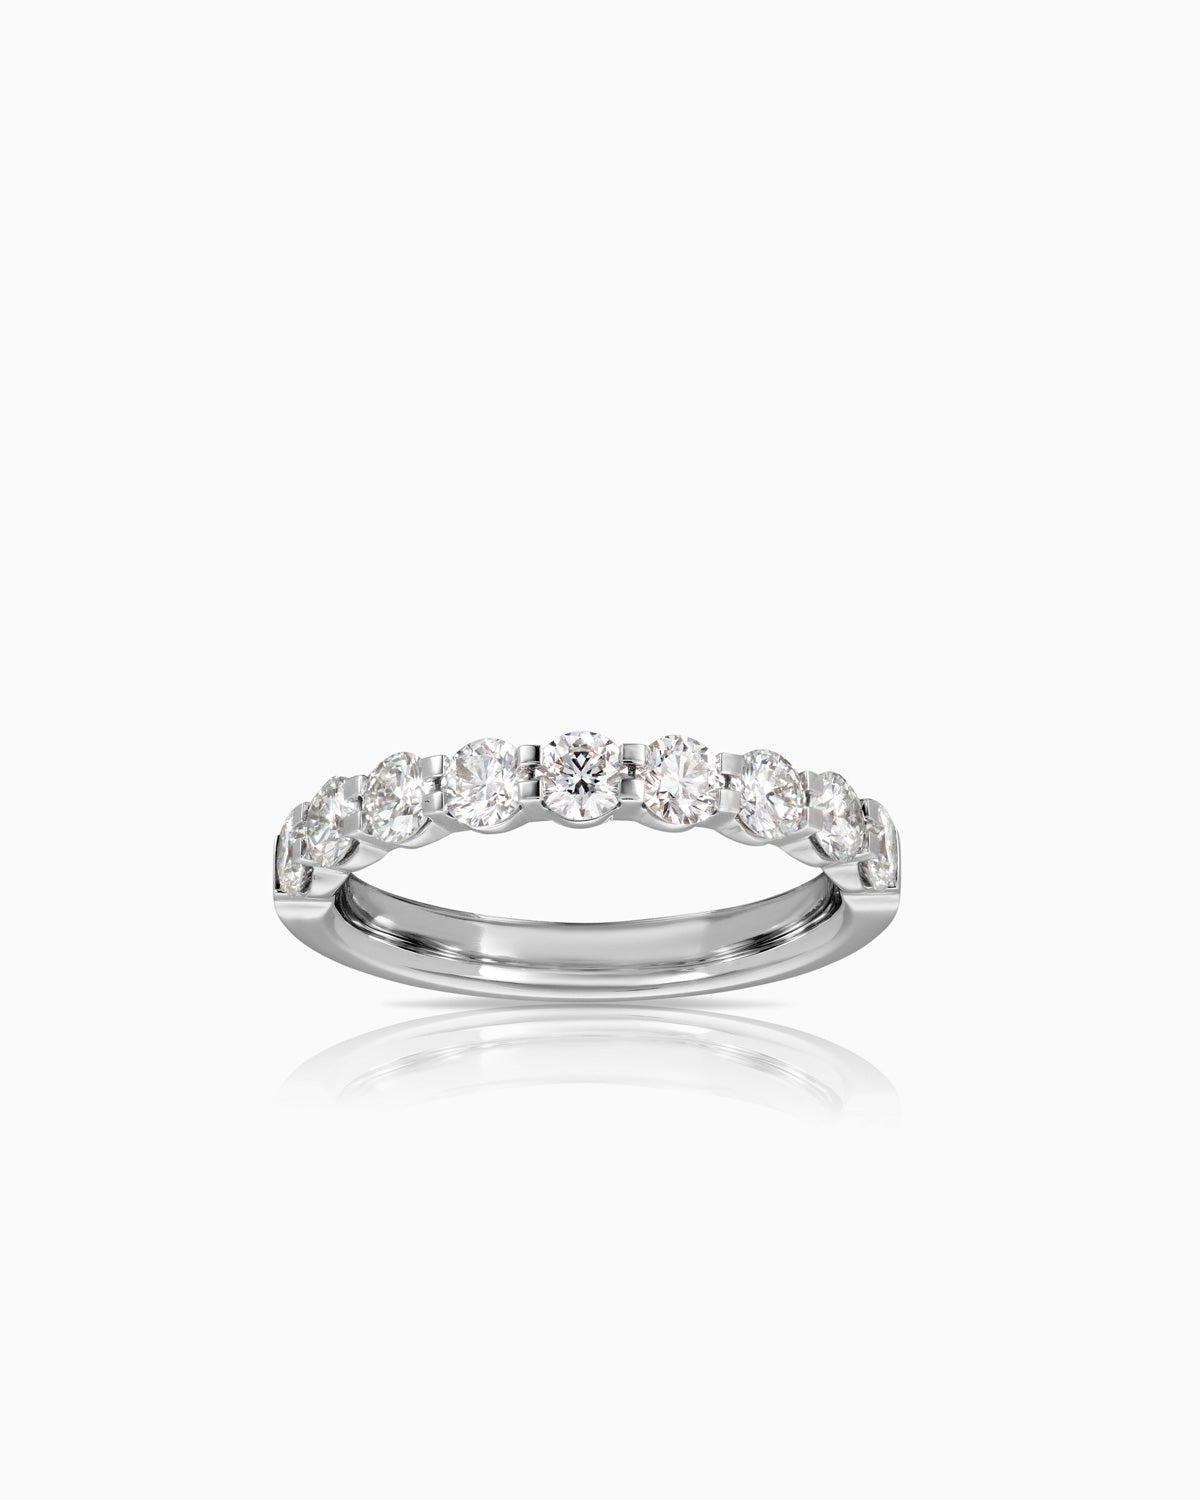 1.05ct 9 stone diamond wedding band by claude and me jewellery